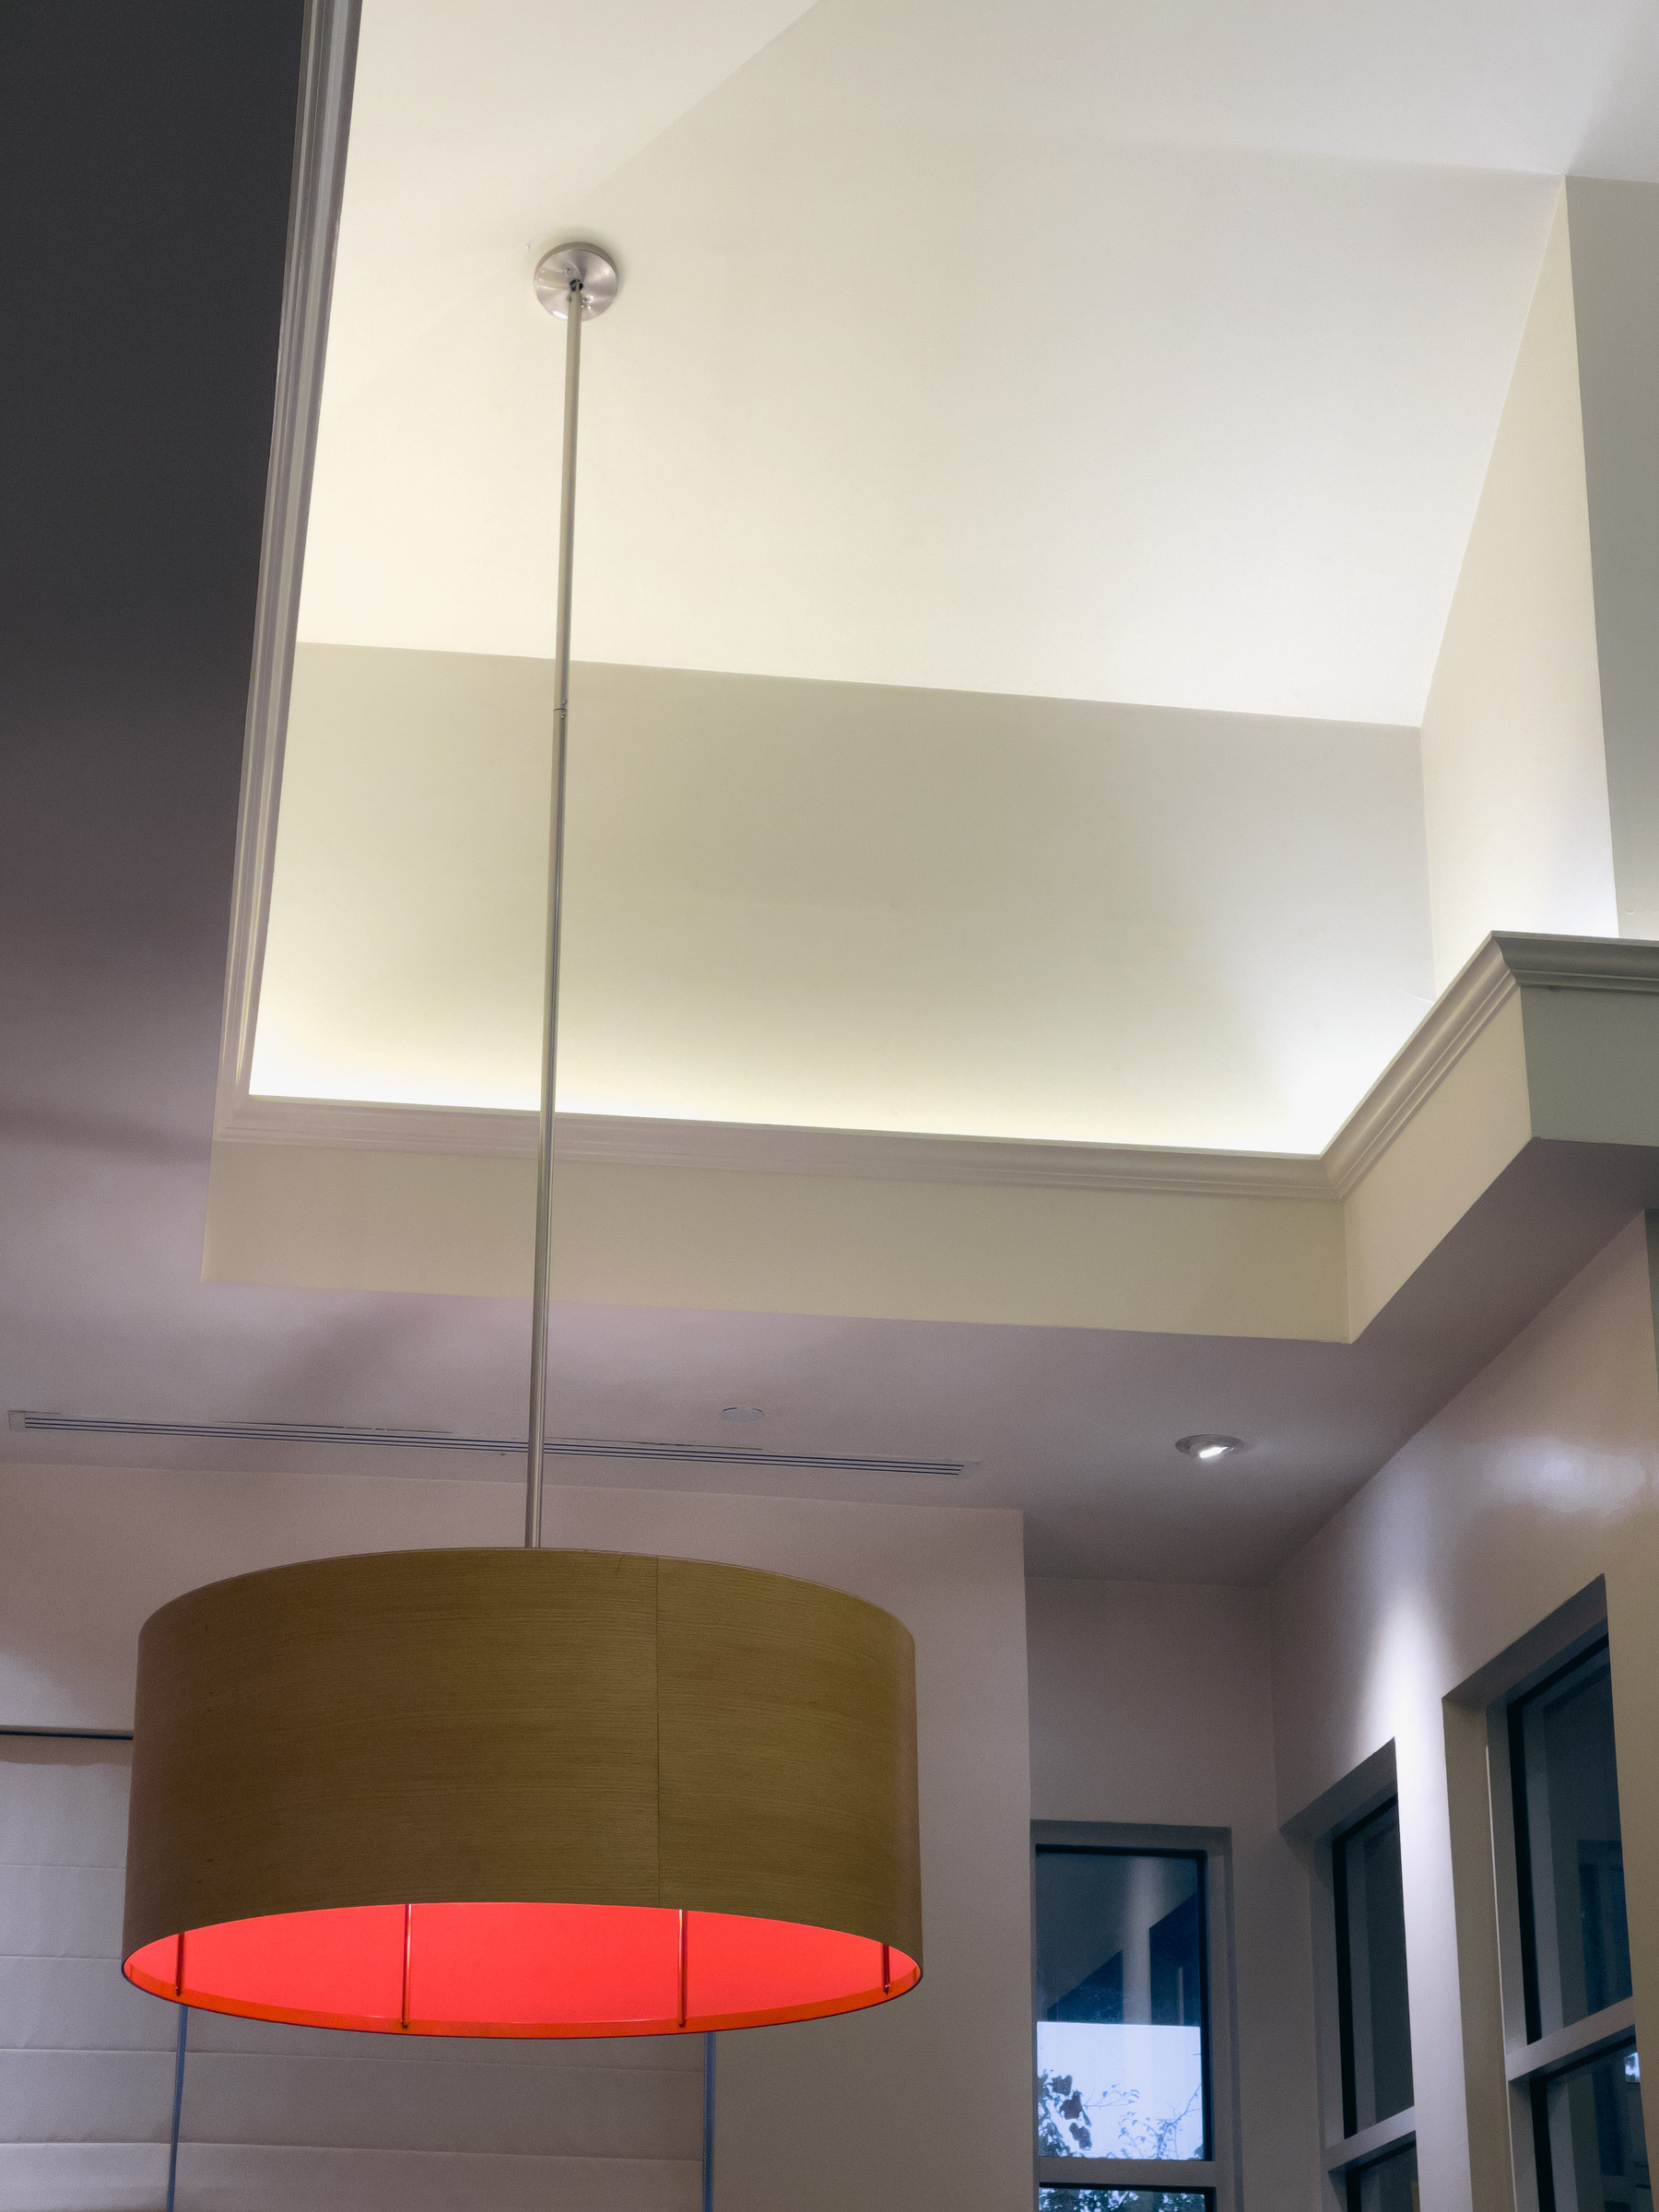 Pendant light fixture in hotel lobby space glowing red.